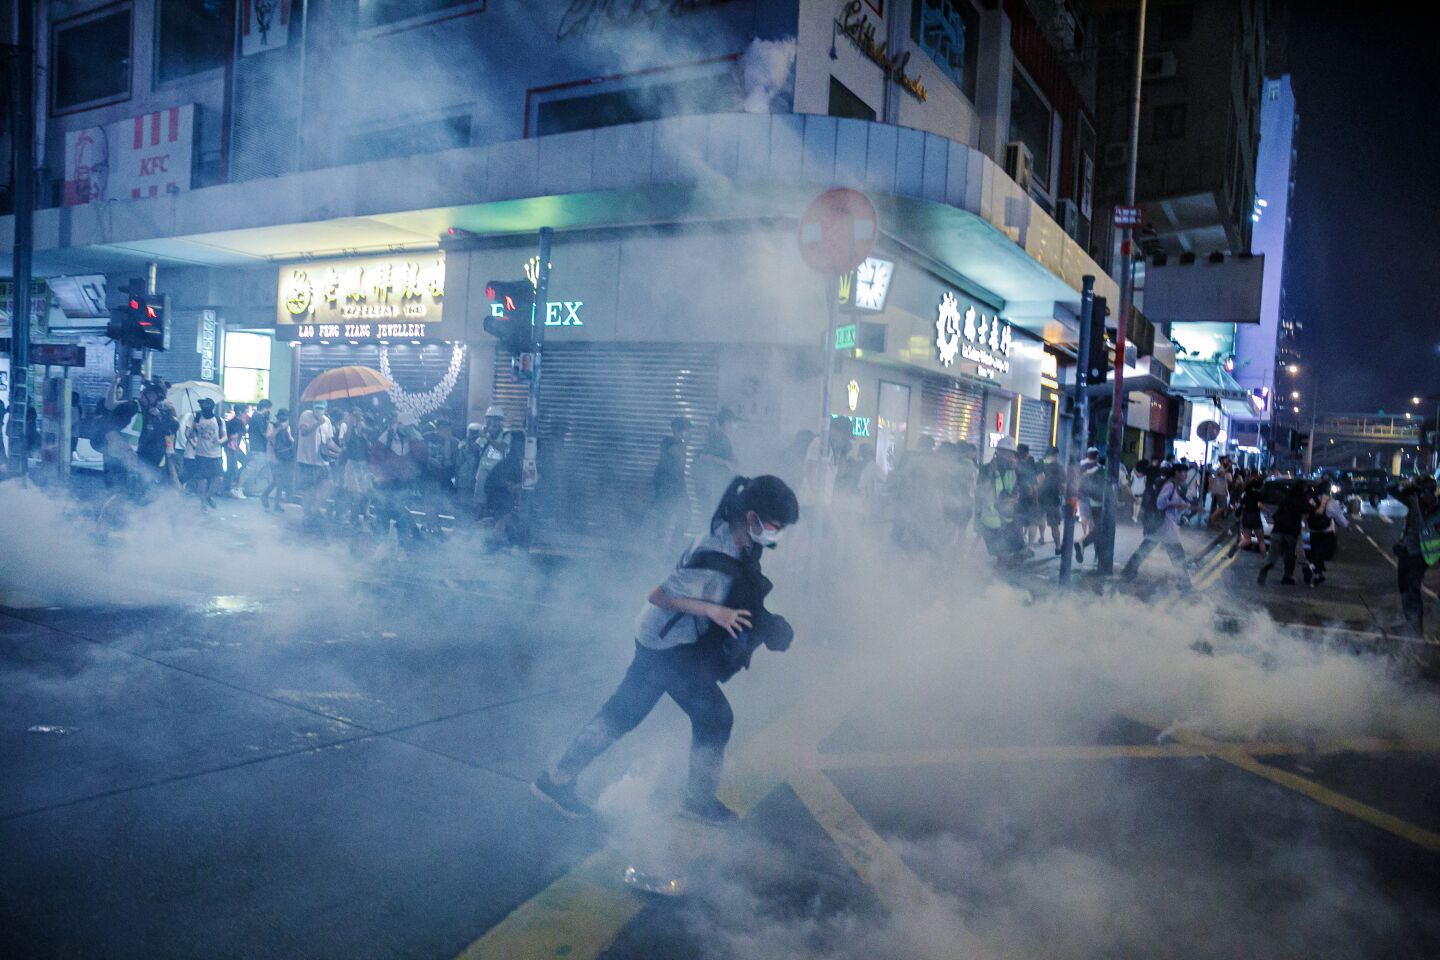 A woman runs through tear gas used by the Hong Kong police to disperse demonstrators, gathering in defiance of the upcoming China's national day, in the Wan Chai area of Hong Kong.